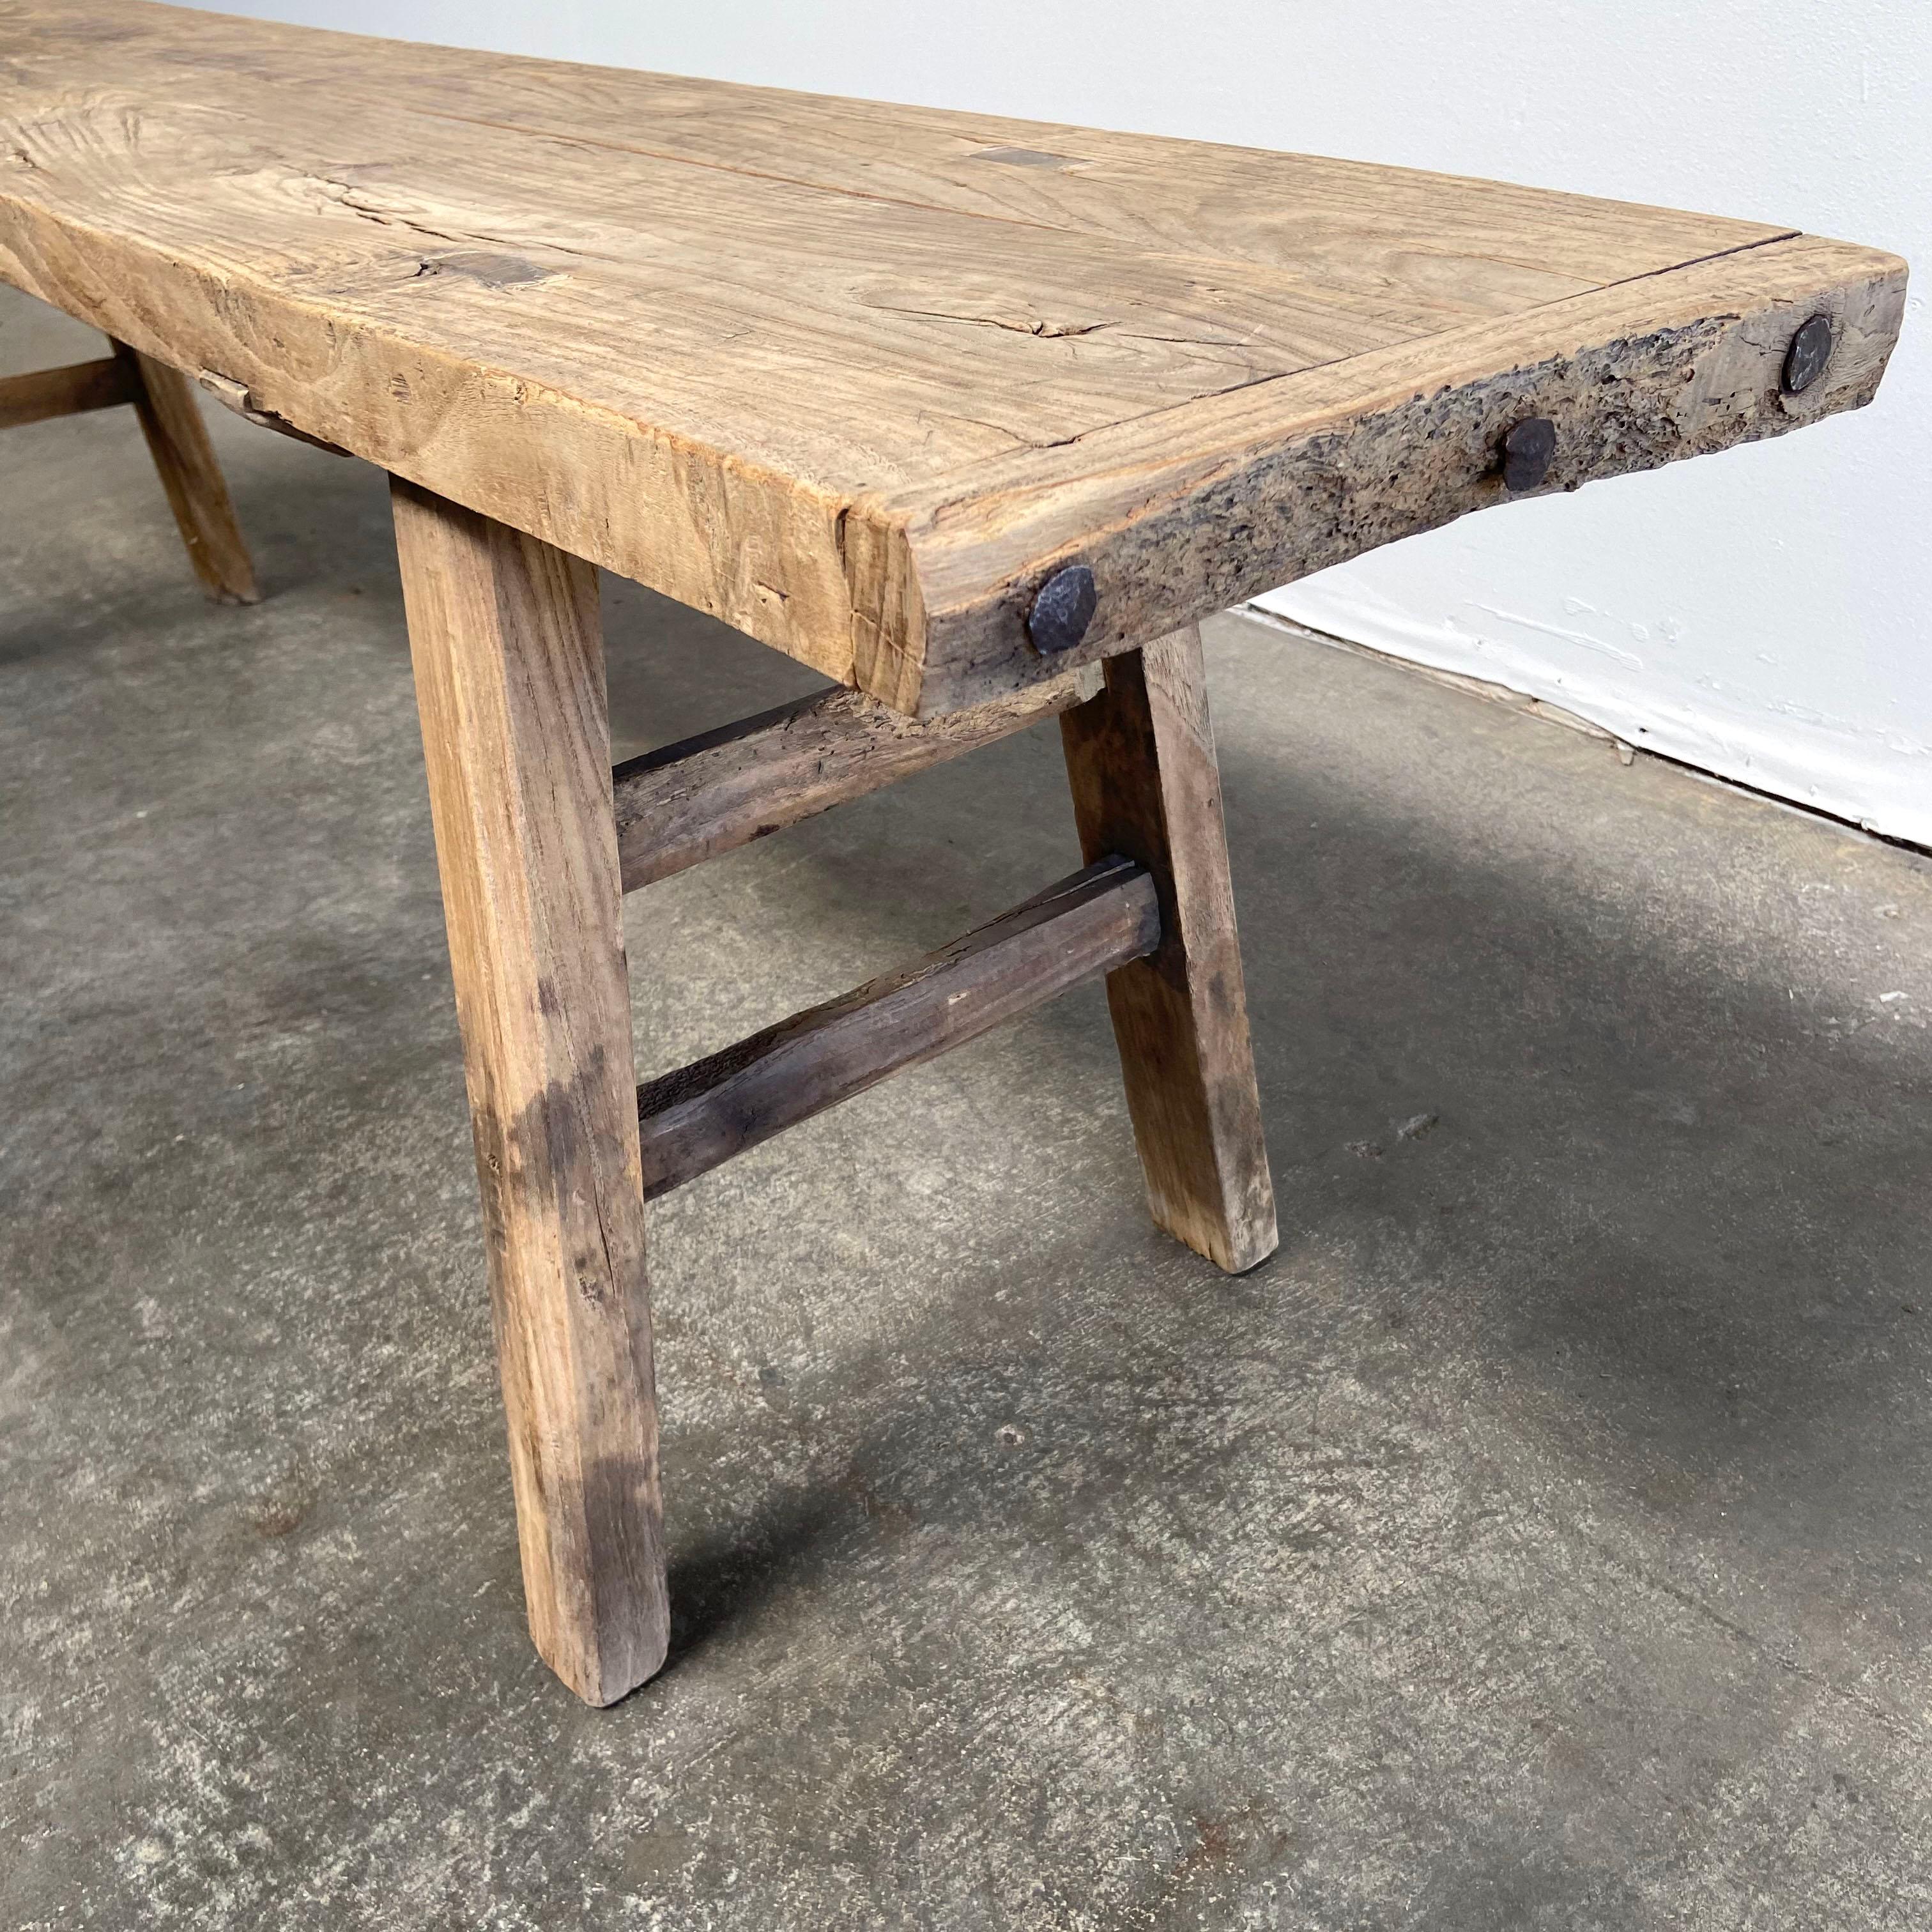 Antique bench / vintage antique elm wood bench
These are the real vintage antique elm wood benches! Beautiful antique patina, with weathering and age, these are solid and sturdy ready for daily use, use as a table behind a sofa, stool, coffee